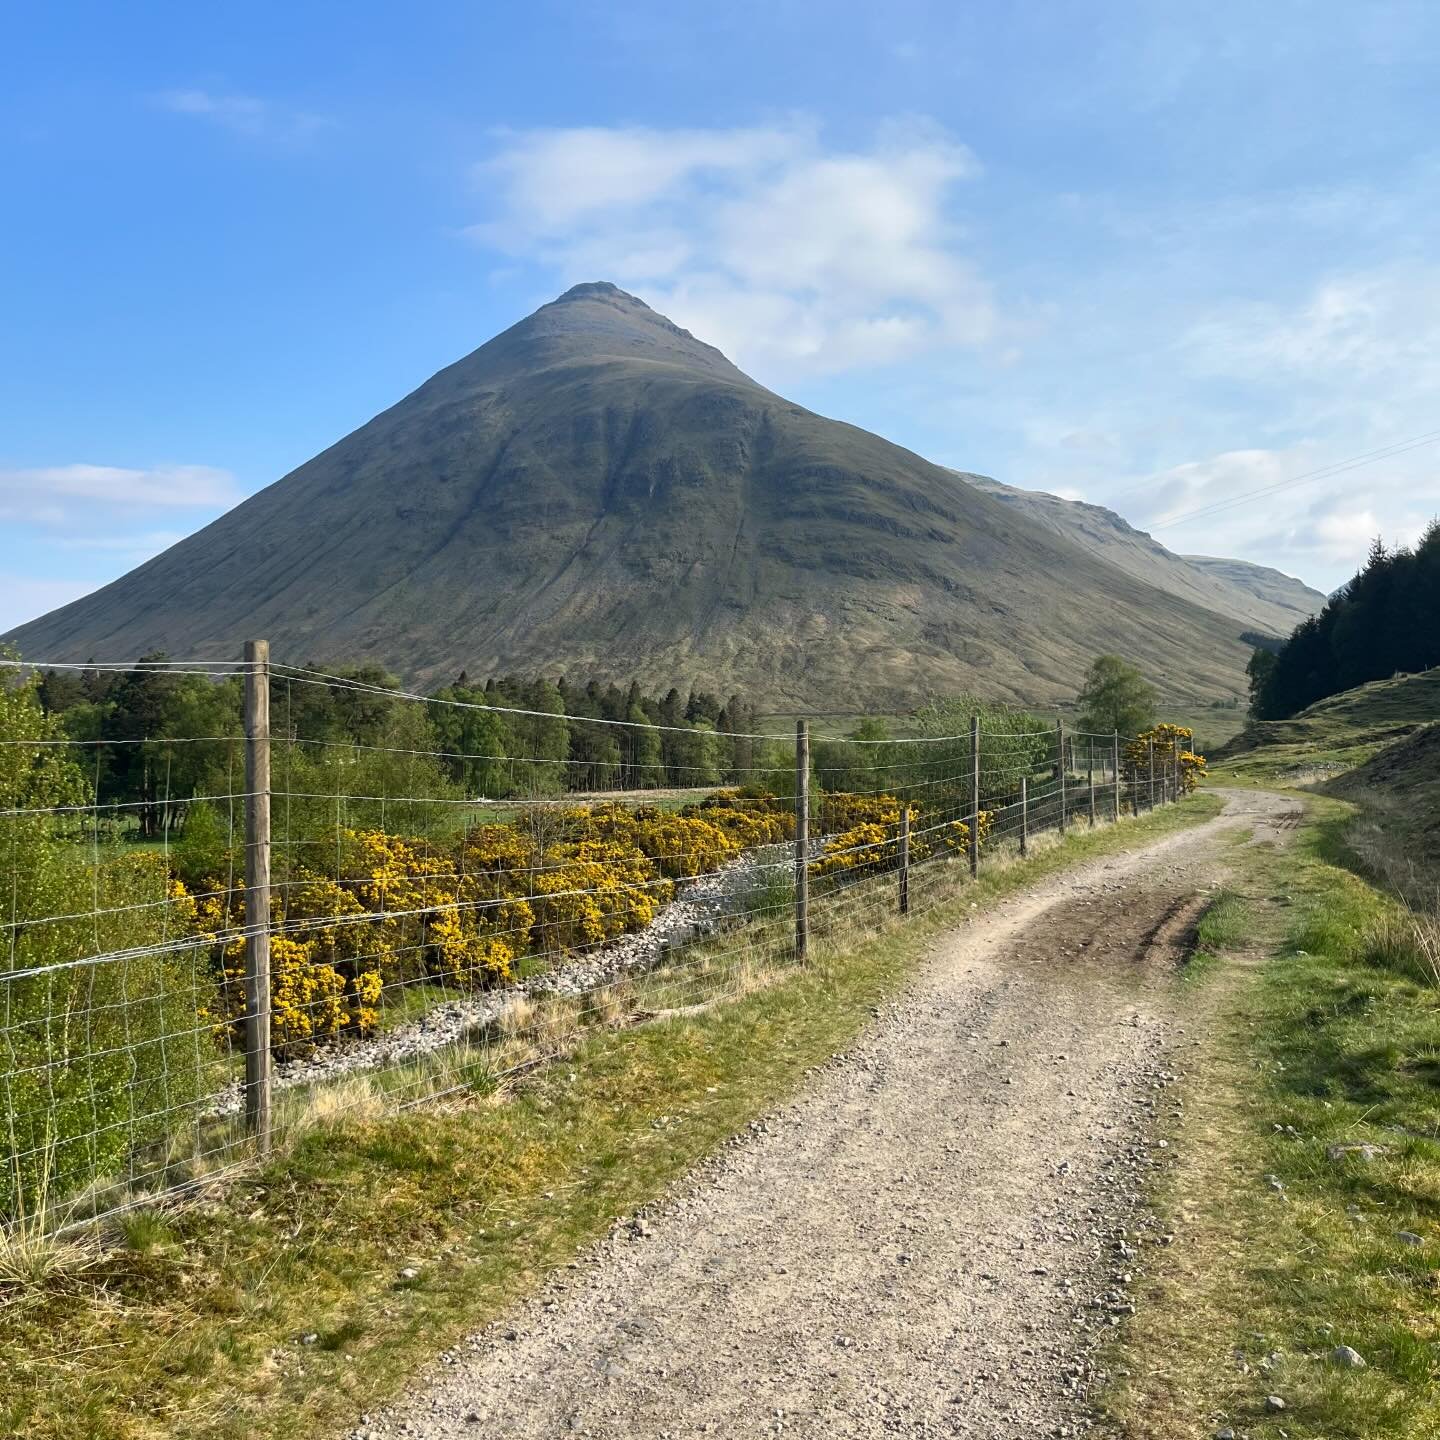 Day 5 of @westhighlandwayofficial from Tyndrum to @kingshouseglencoe at just under 20 miles it was the longest walk of the week but stunning weather helped. 🏴󠁧󠁢󠁳󠁣󠁴󠁿 looking even more amazing than usual, also meeting lots of people from around 